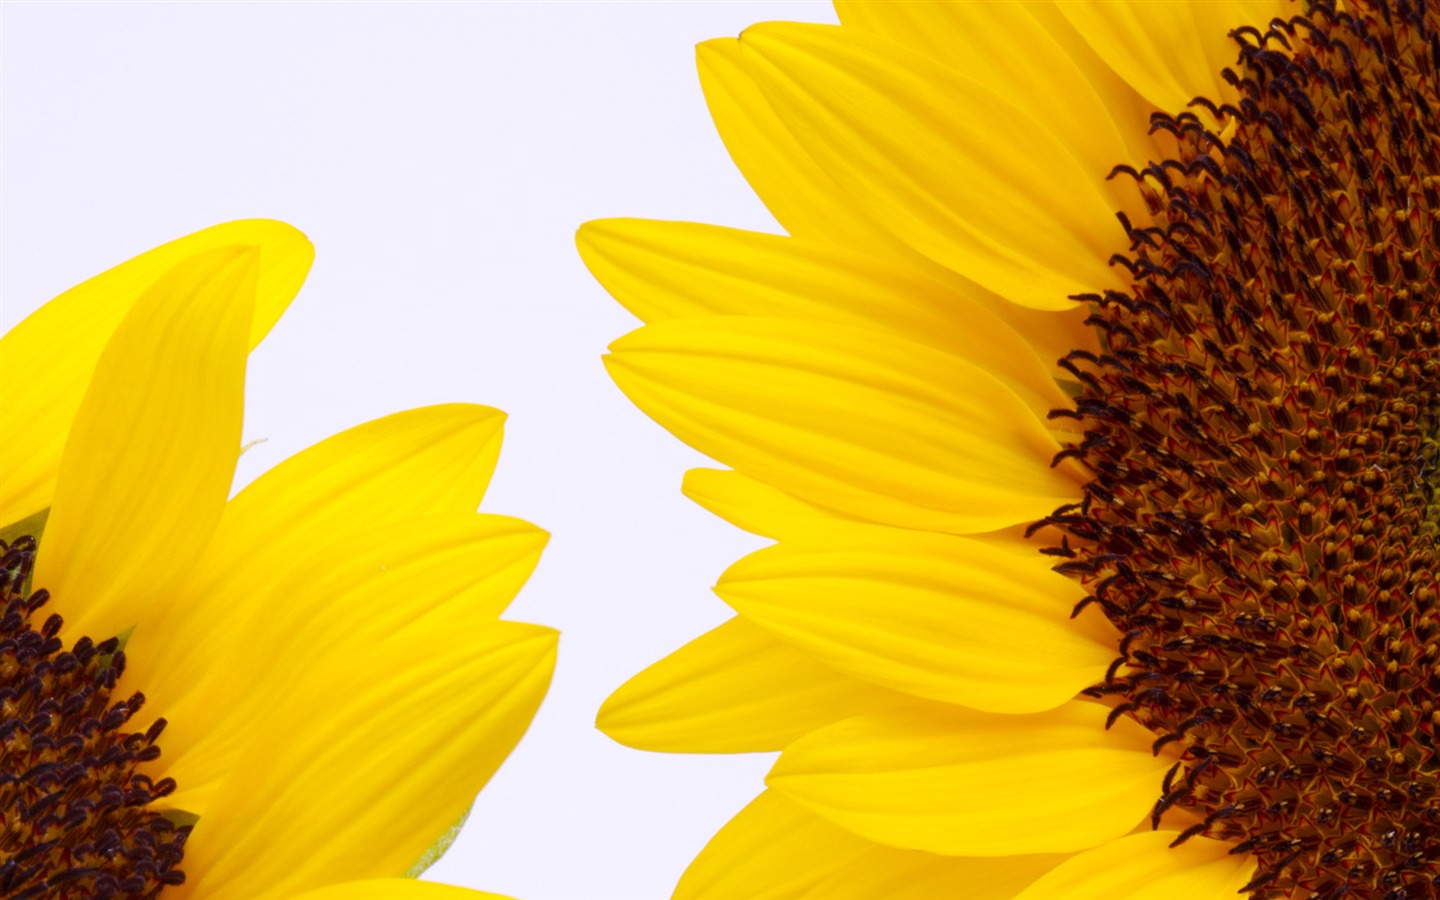 Sunny sunflower photo HD Wallpapers #31 - 1440x900